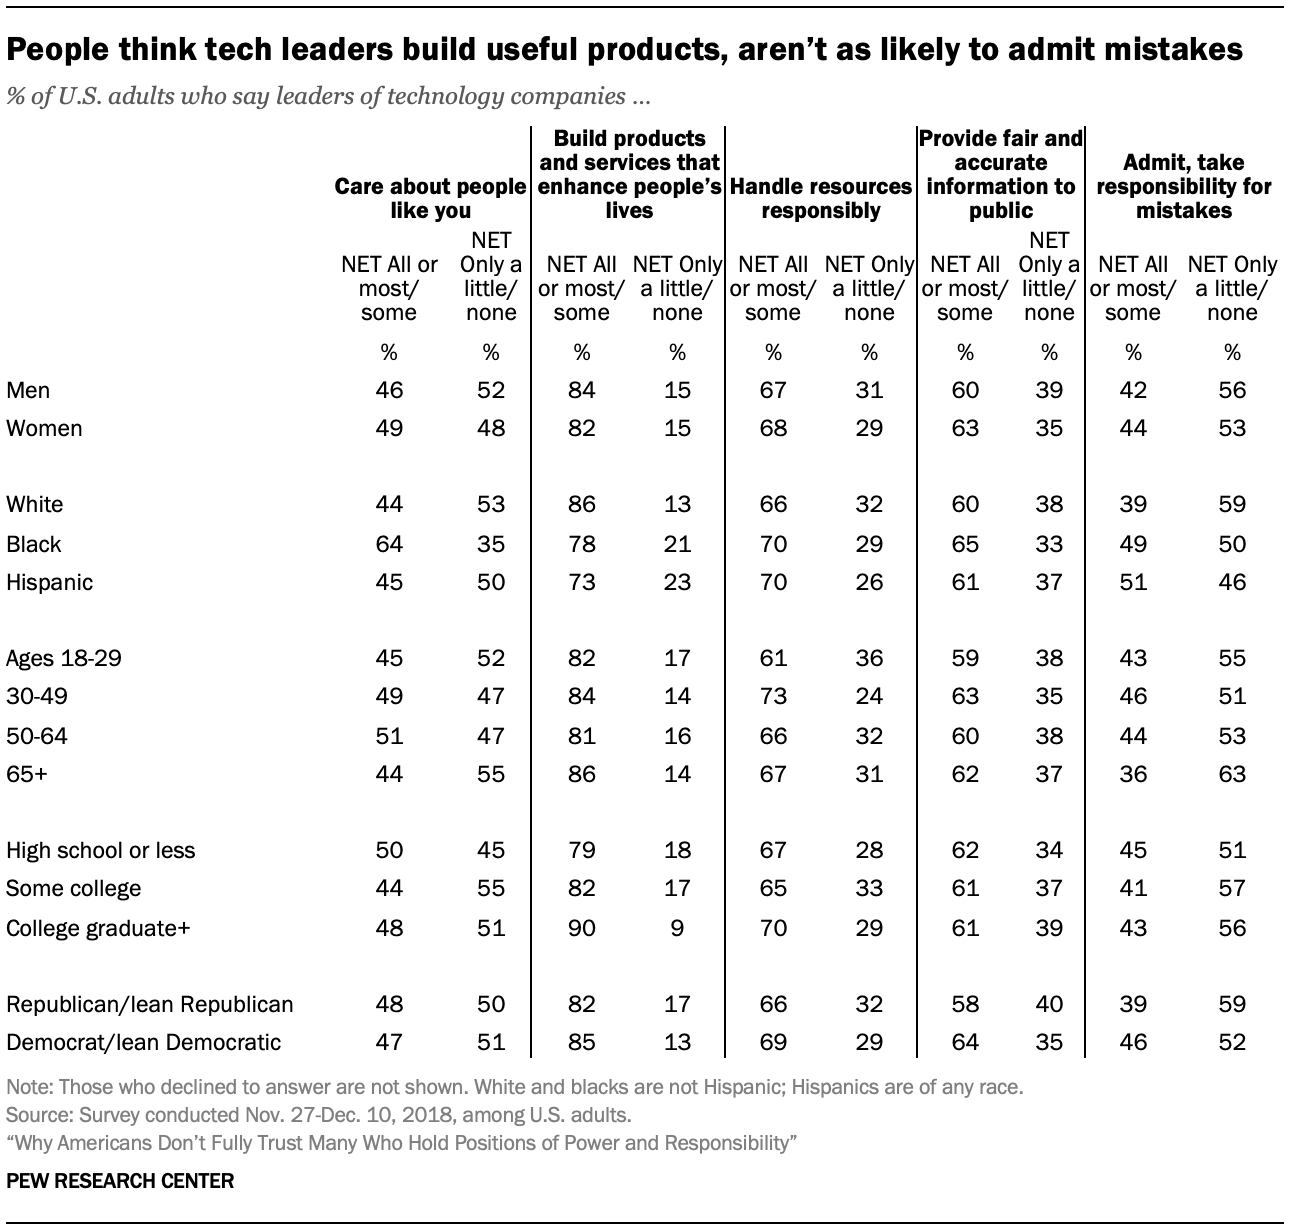 People think tech leaders build useful products, aren’t as likely to admit mistakes